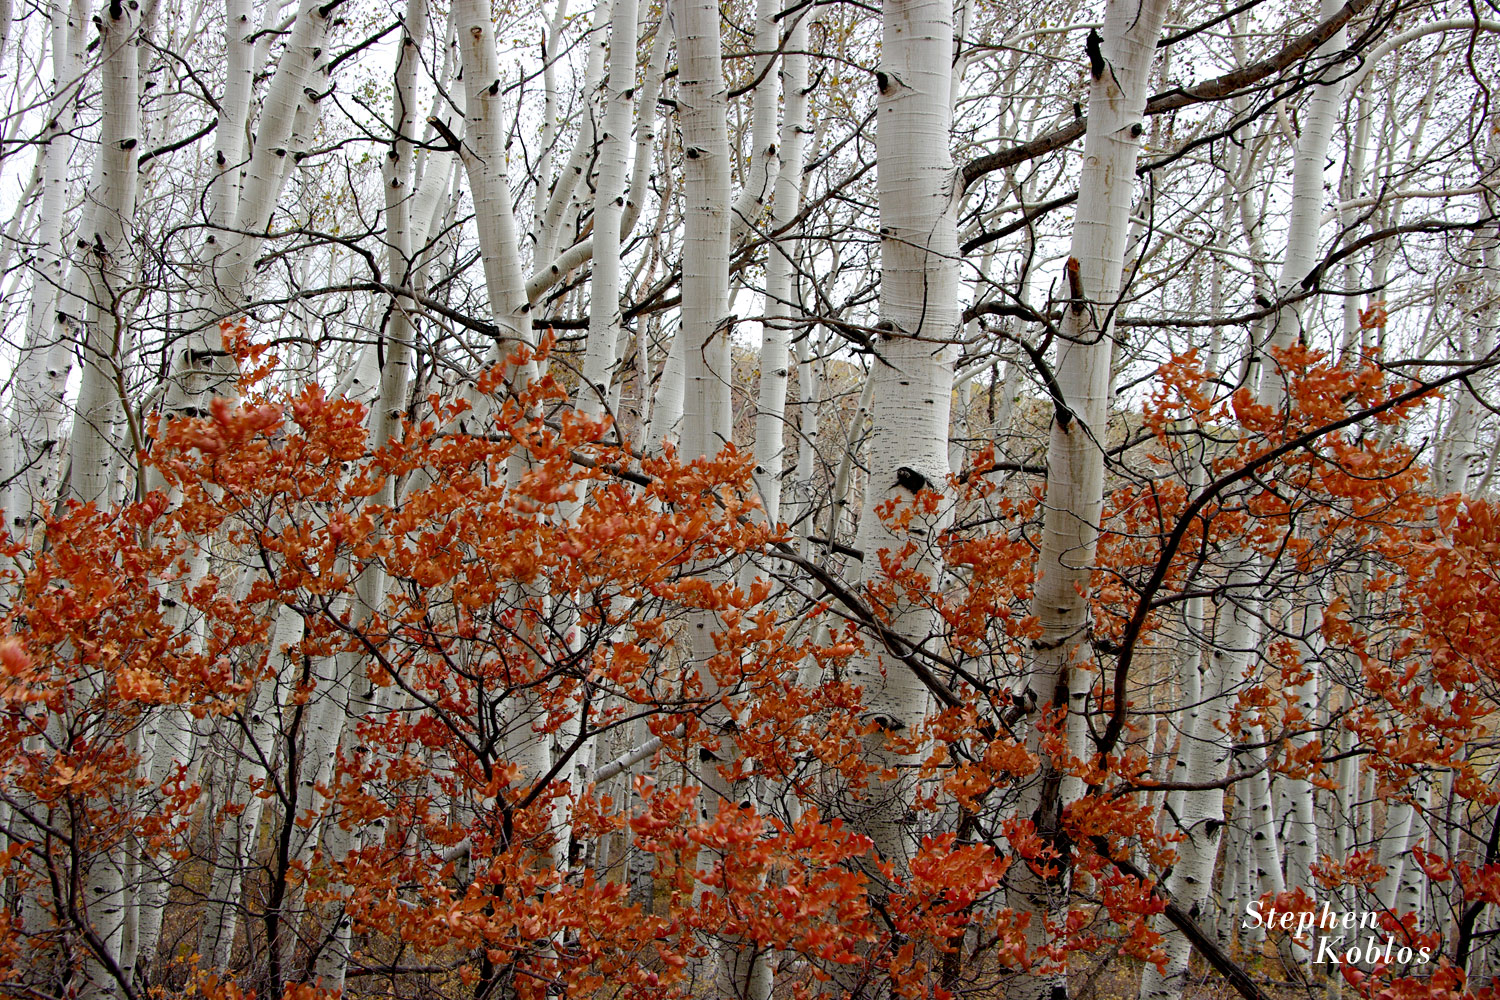 I was driving on Last Dollar Road in late in the fall of 2009, after most of the aspen leaves had fallen, when I came across...